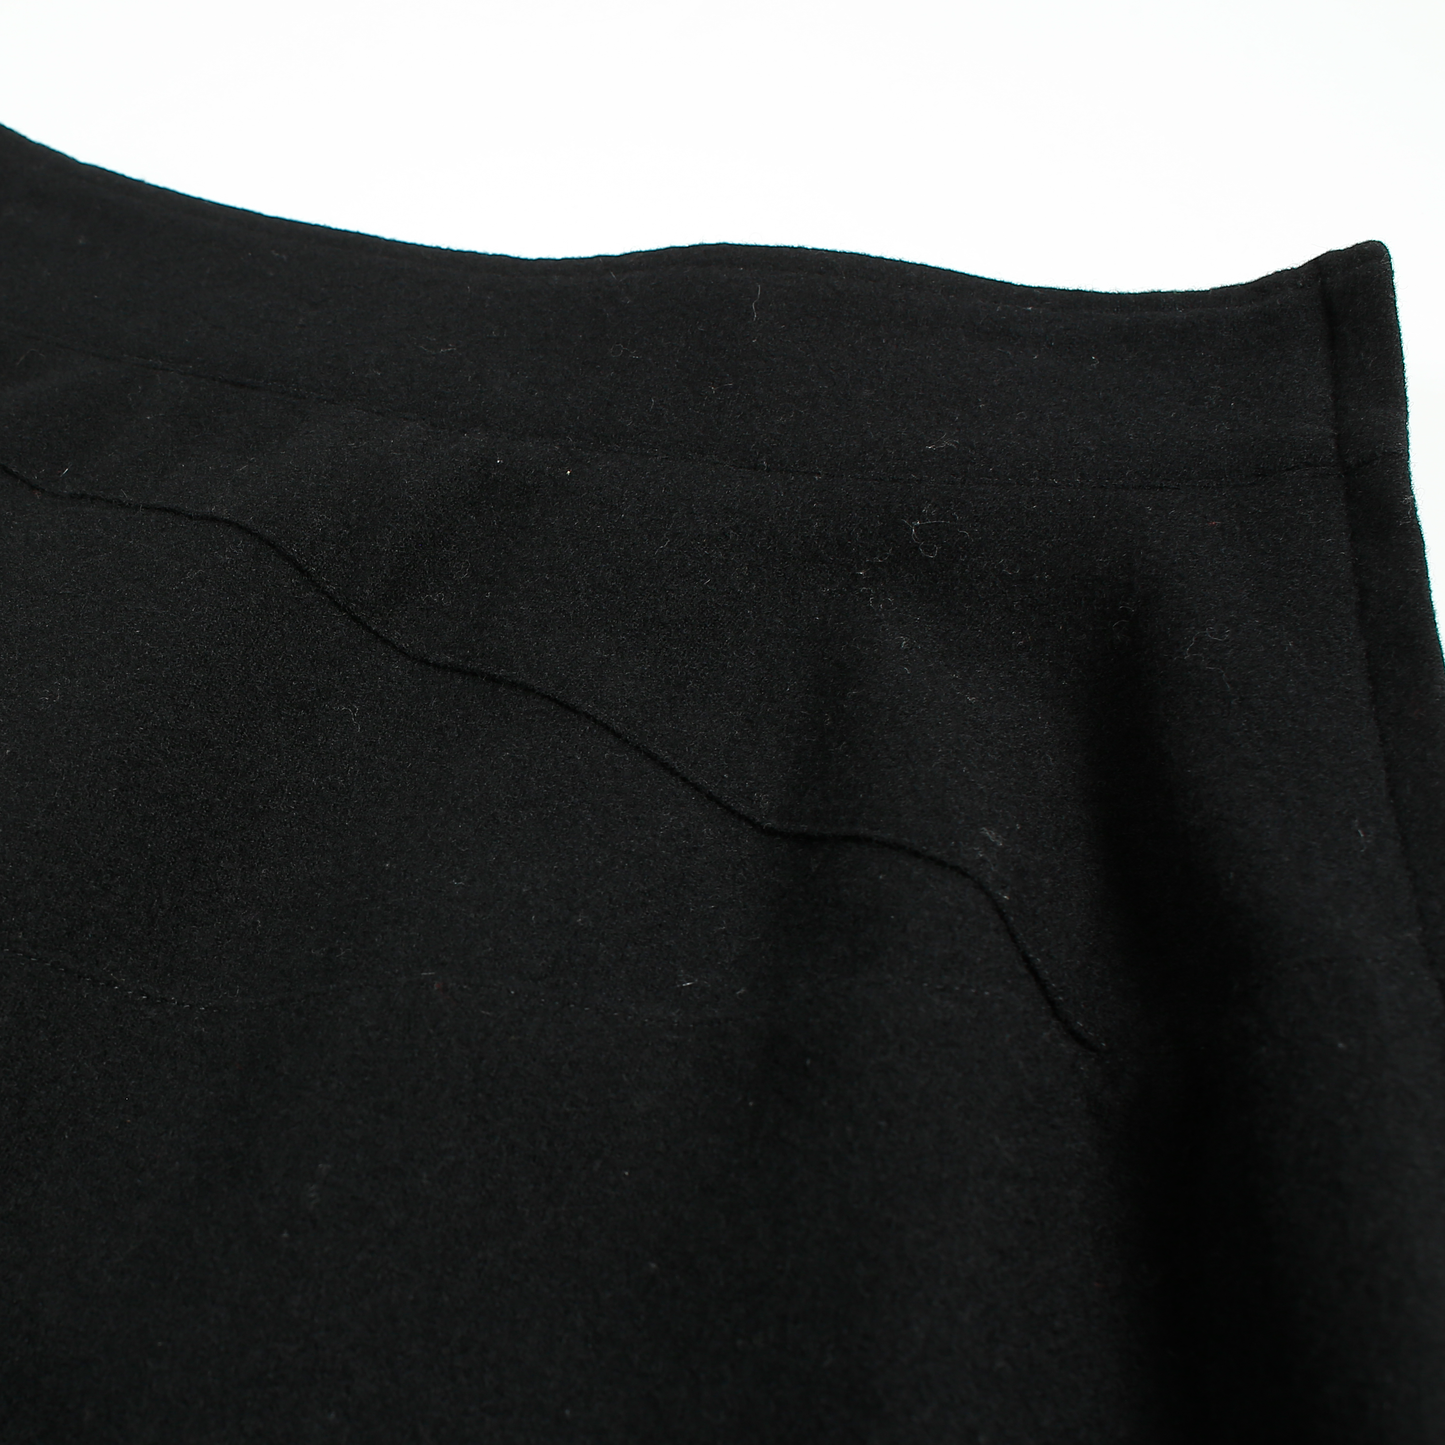 CDG Tricot Black Wool Panelled Skirt - AD1991